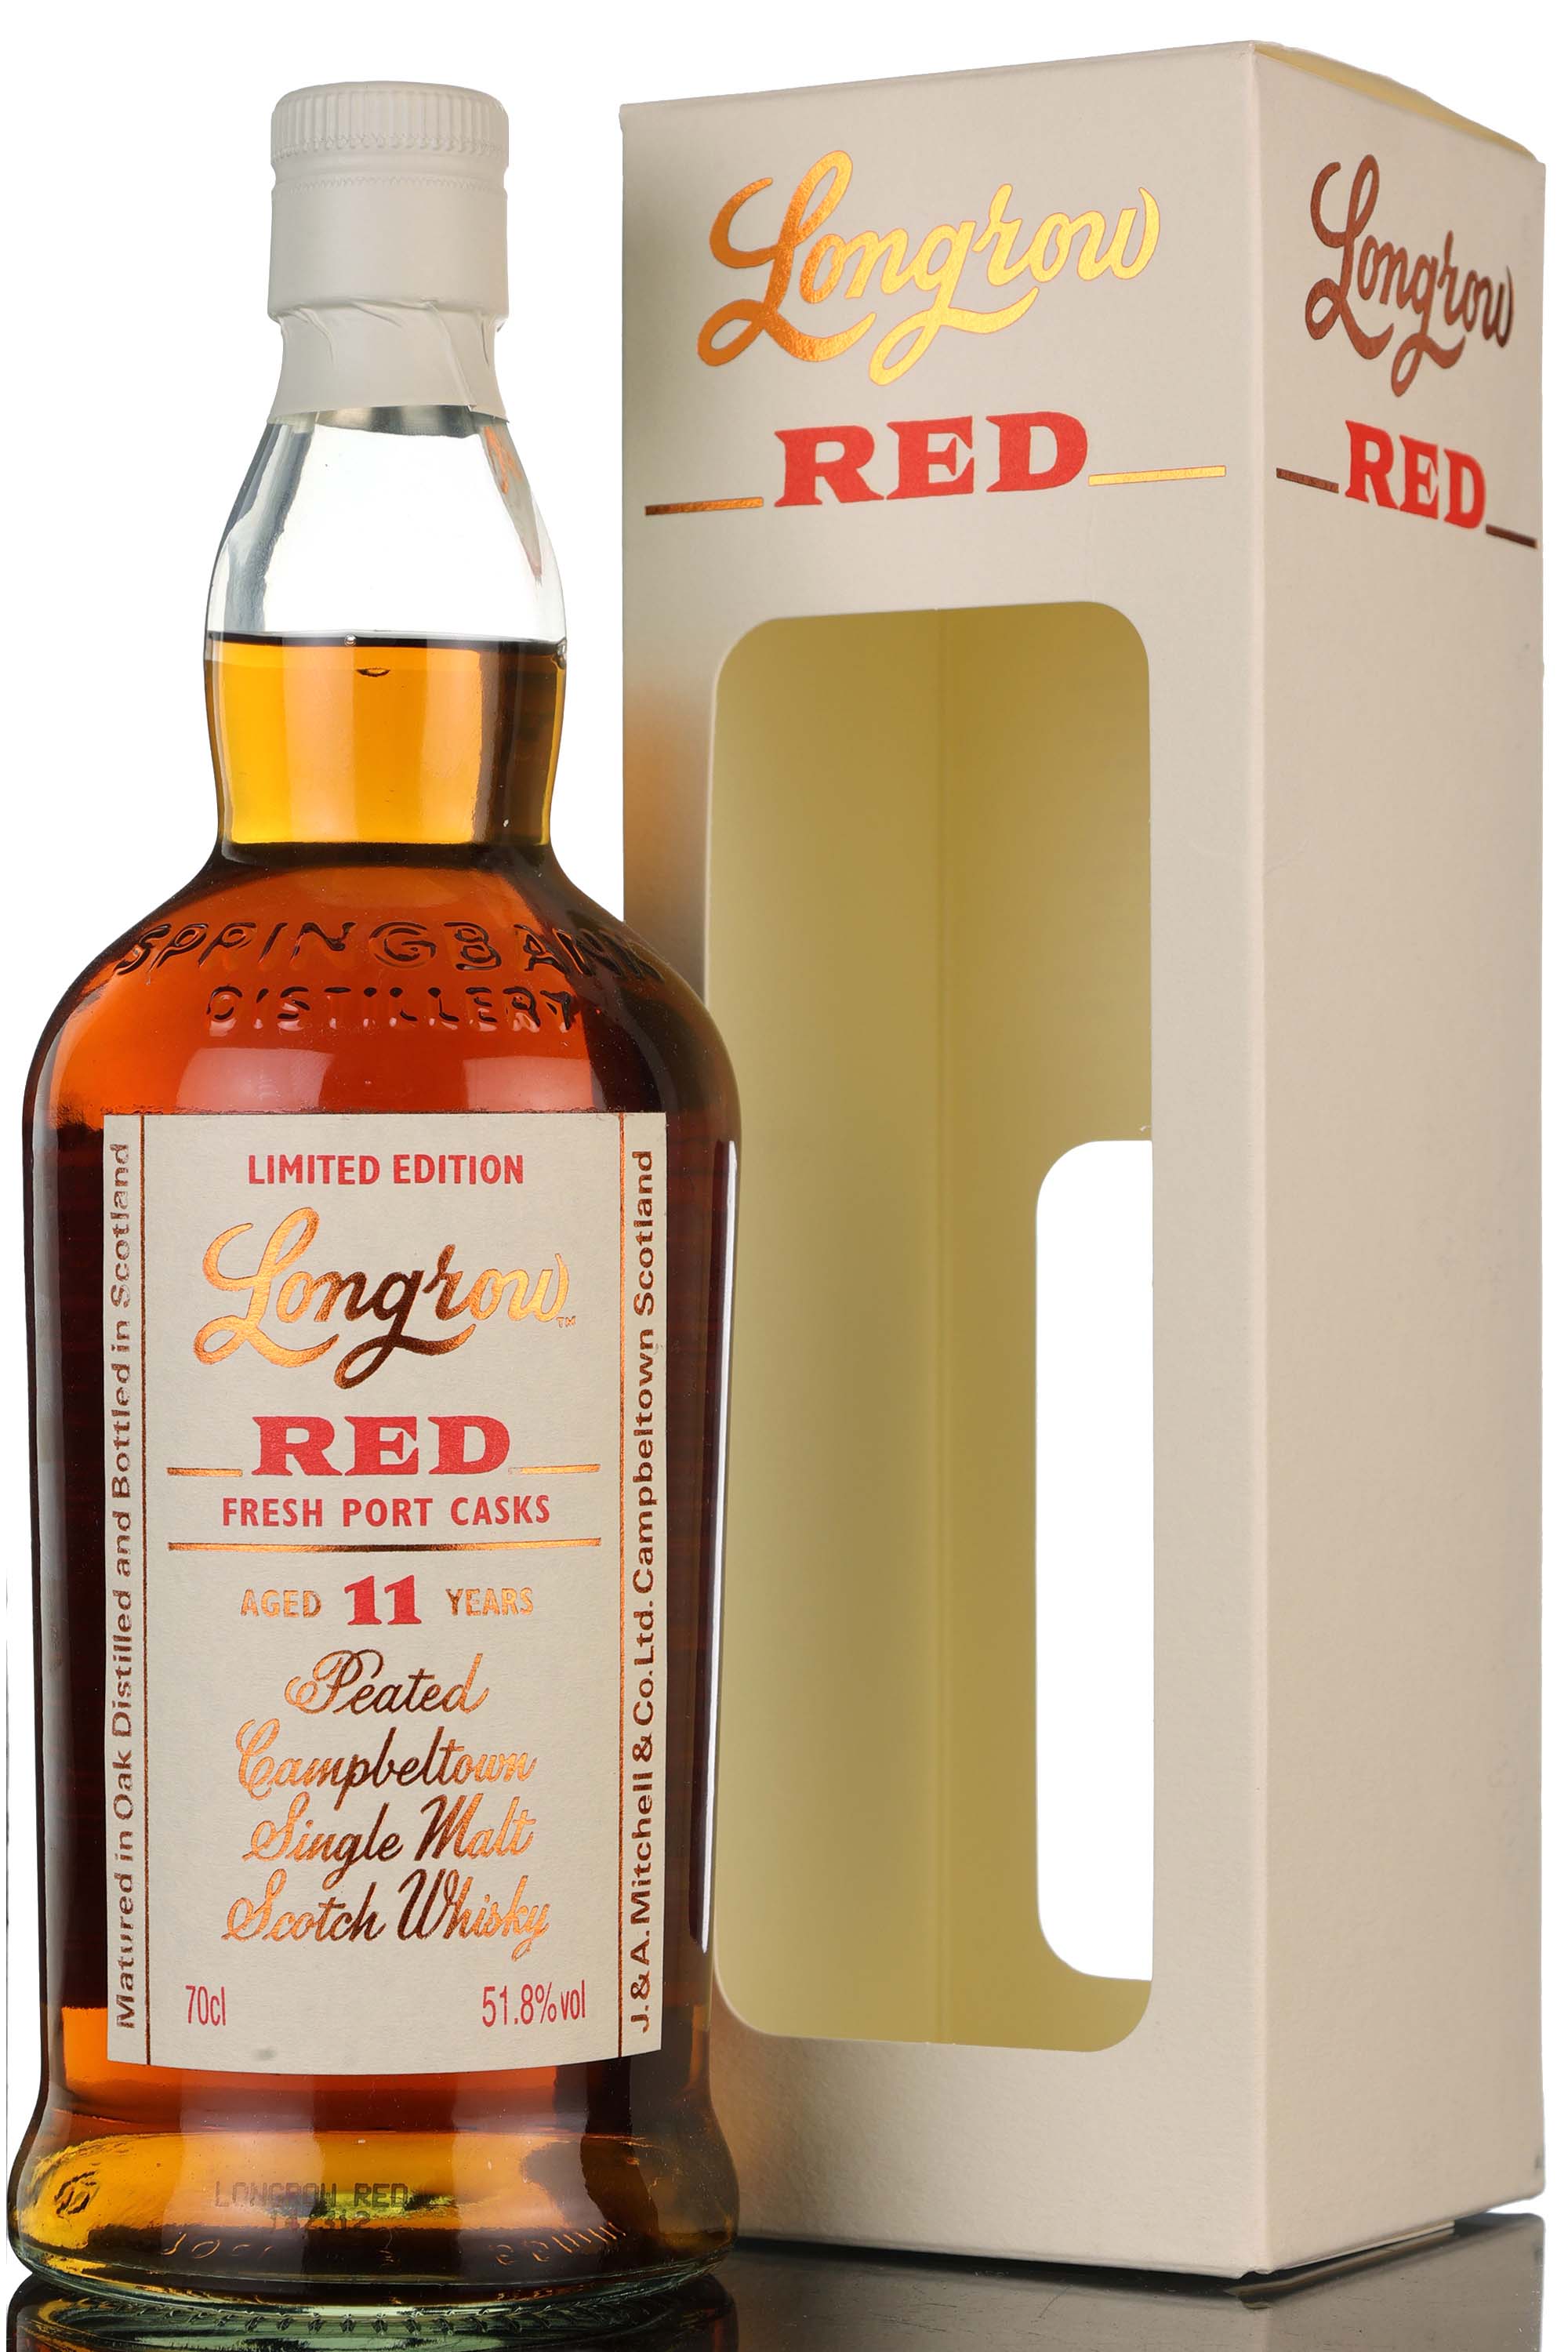 Longrow Red - 11 Year Old - Fresh Port Casks - 2014 Release